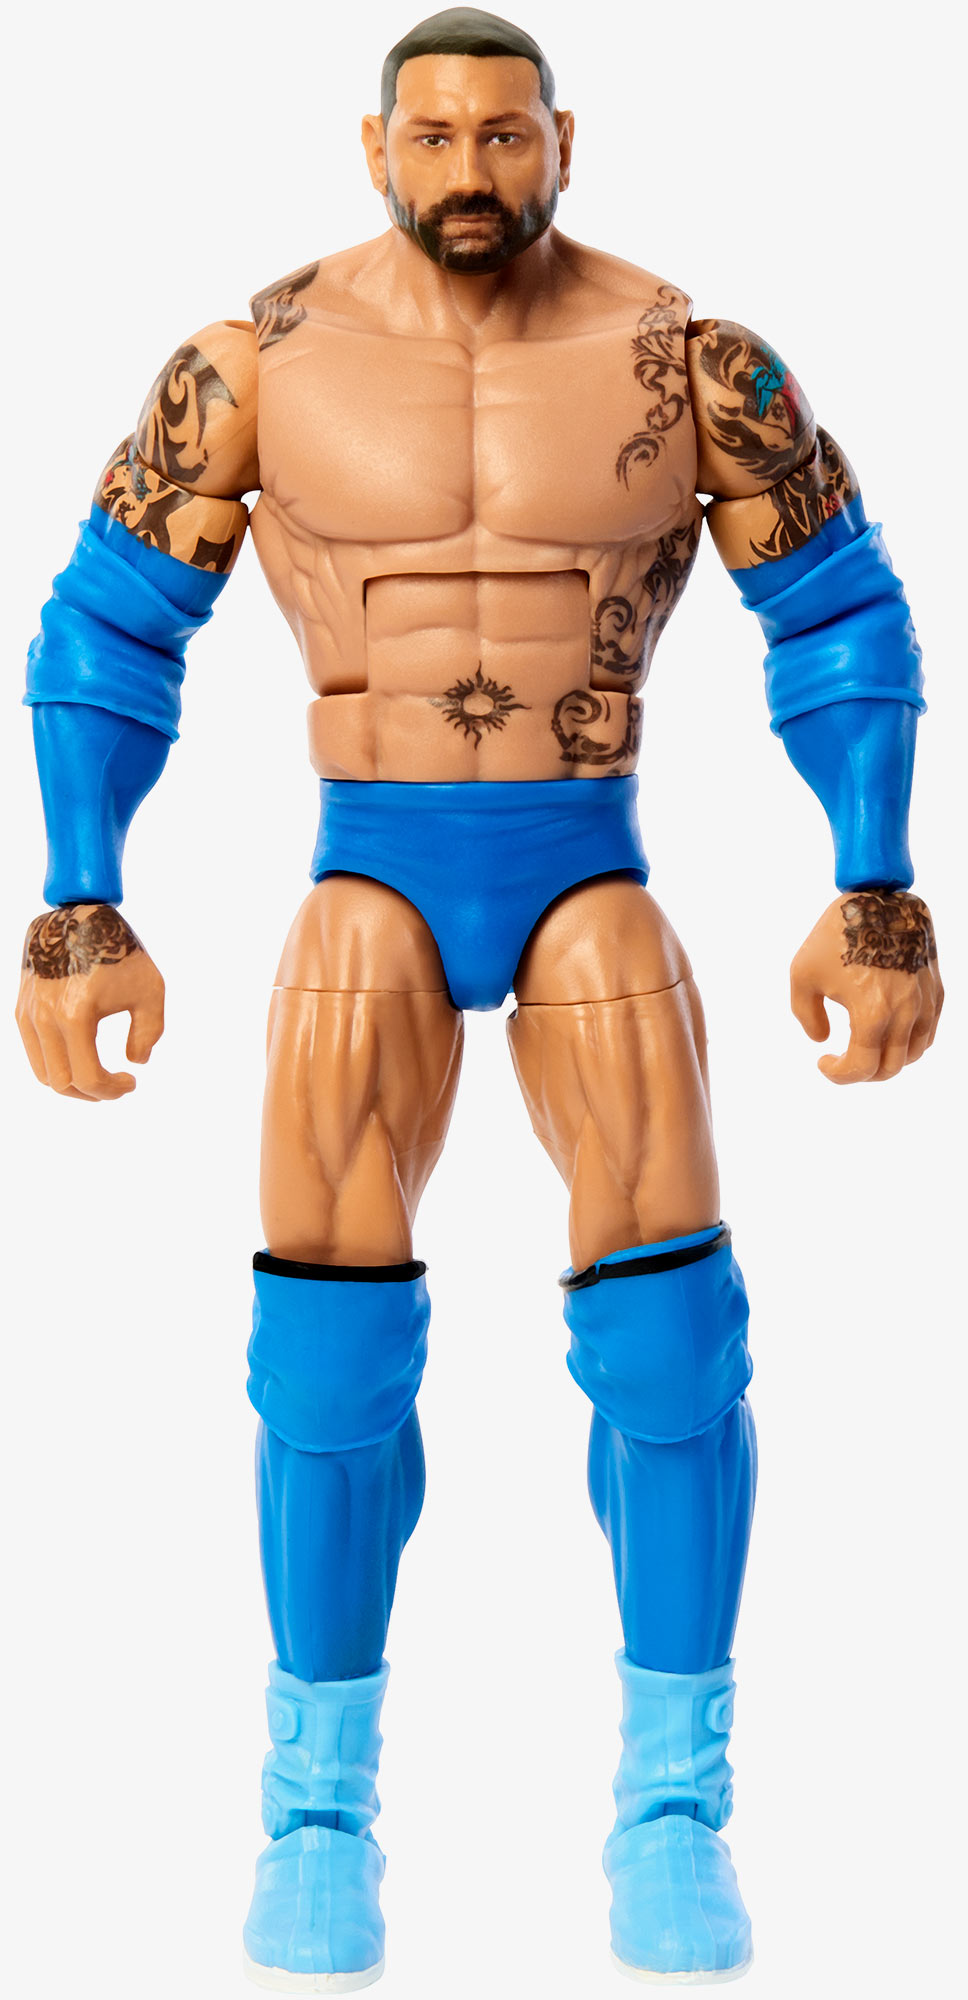 Batista WWE Elite Collection Greatest Hits Series #2